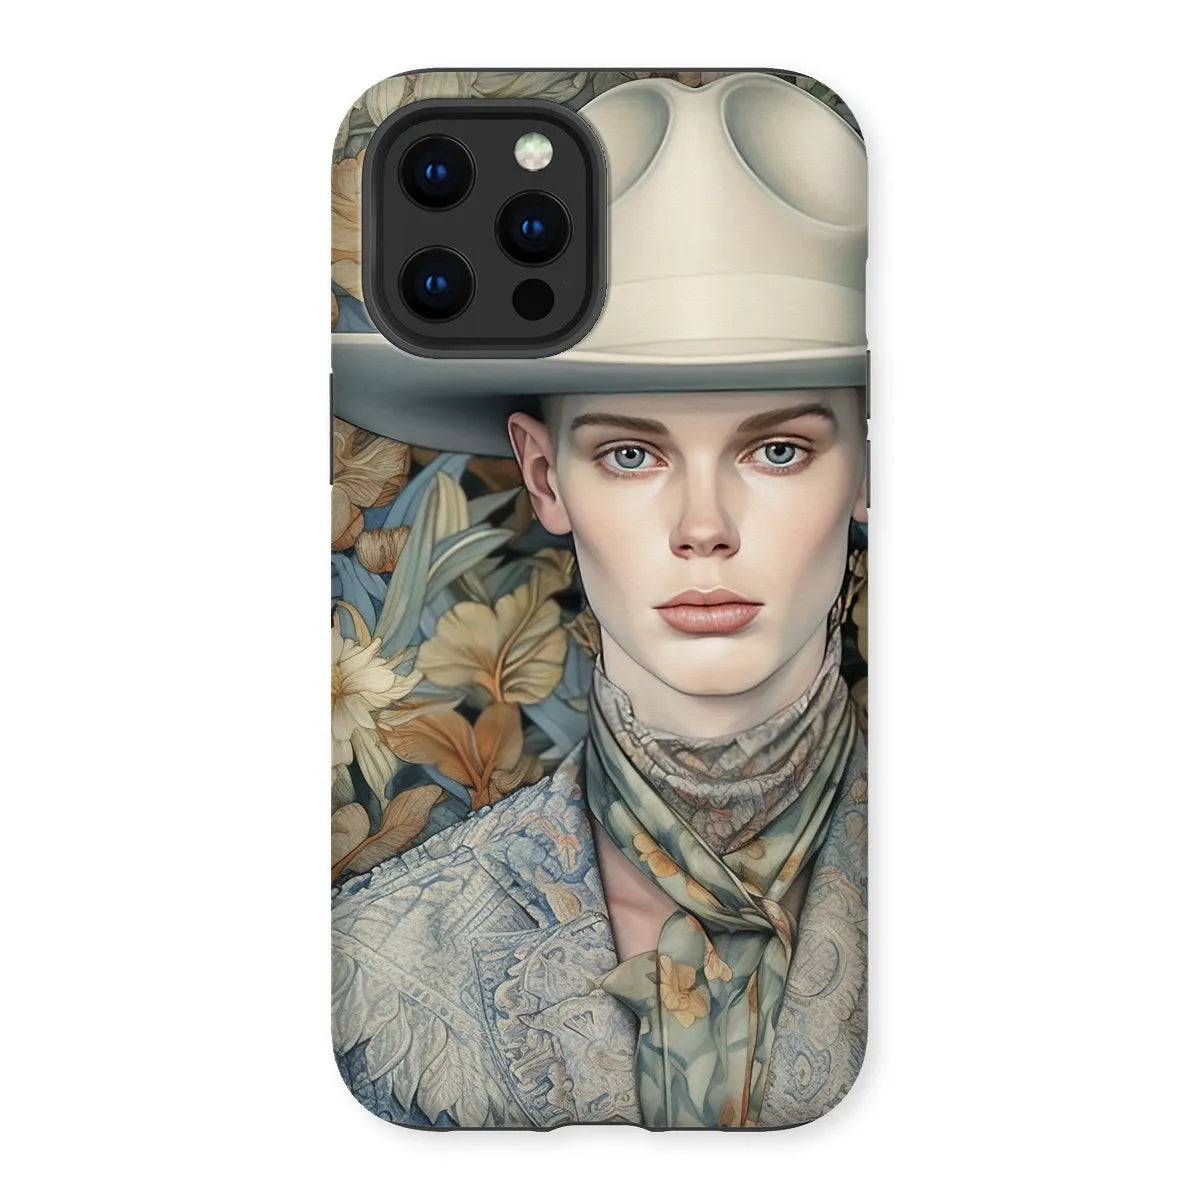 Jasper The Gay Cowboy - Dandy Gay Aesthetic Art Phone Case - Iphone 13 Pro Max / Matte - Mobile Phone Cases - Aesthetic